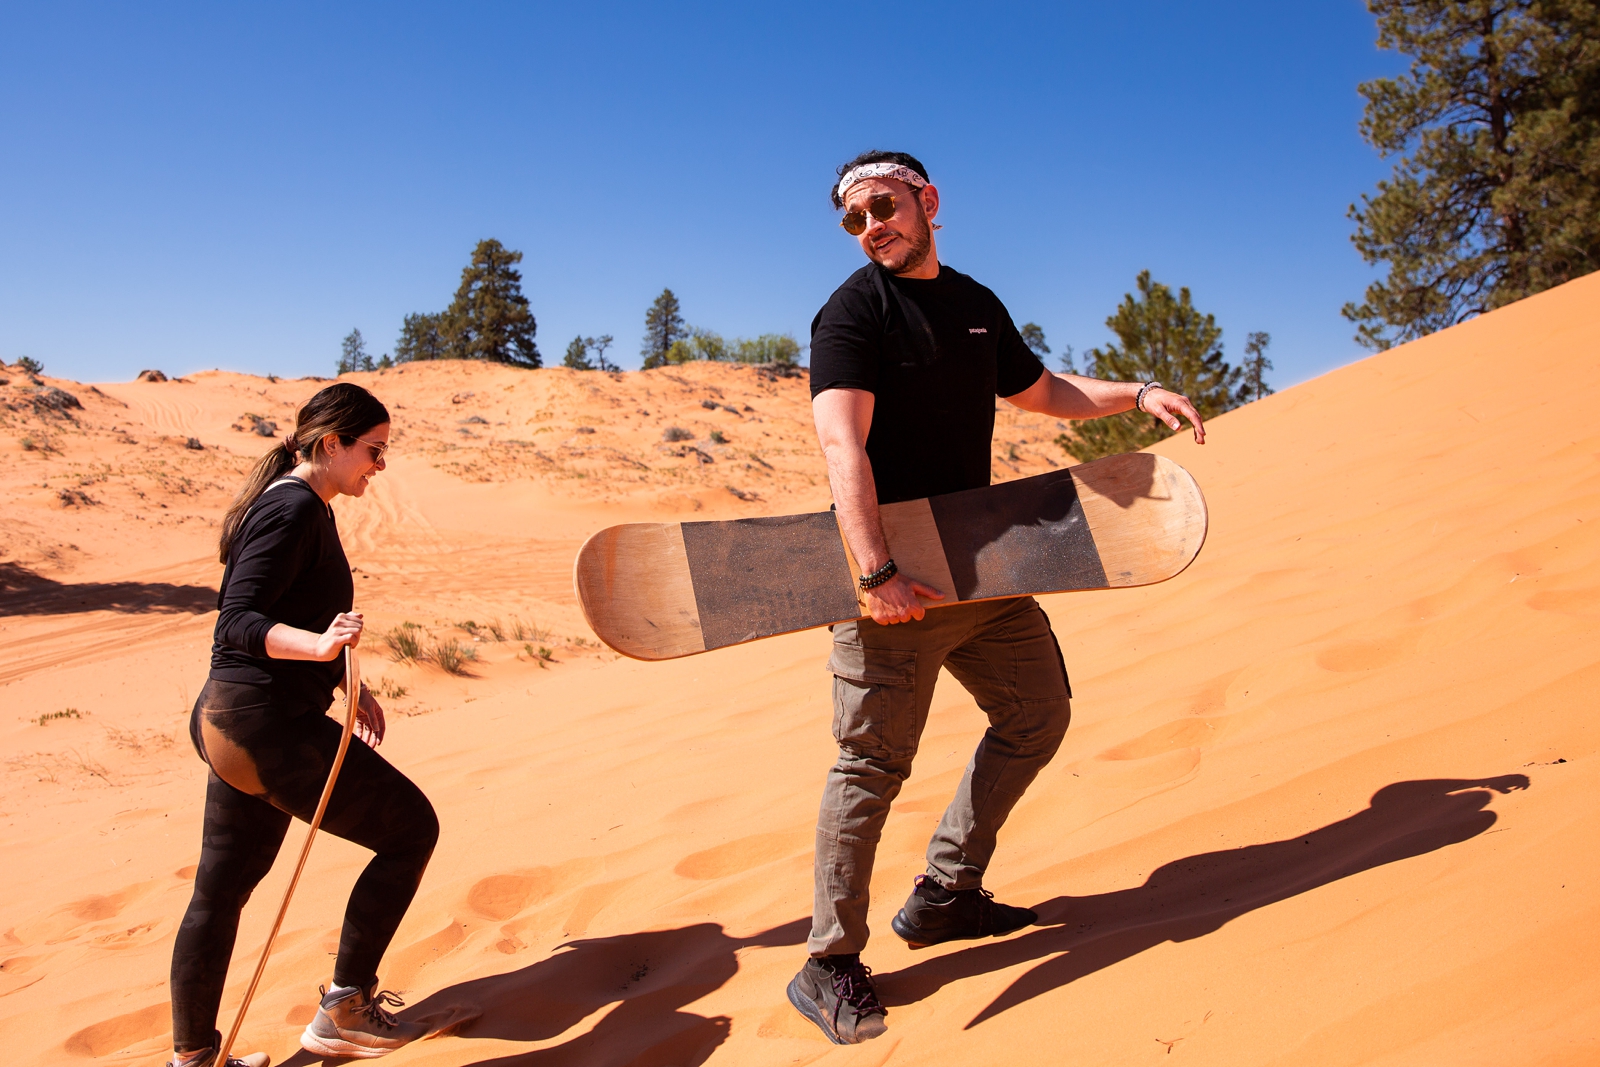 a newly engaged couple walking back up the sand hill after sandboarding down it by the Utah slot canyons